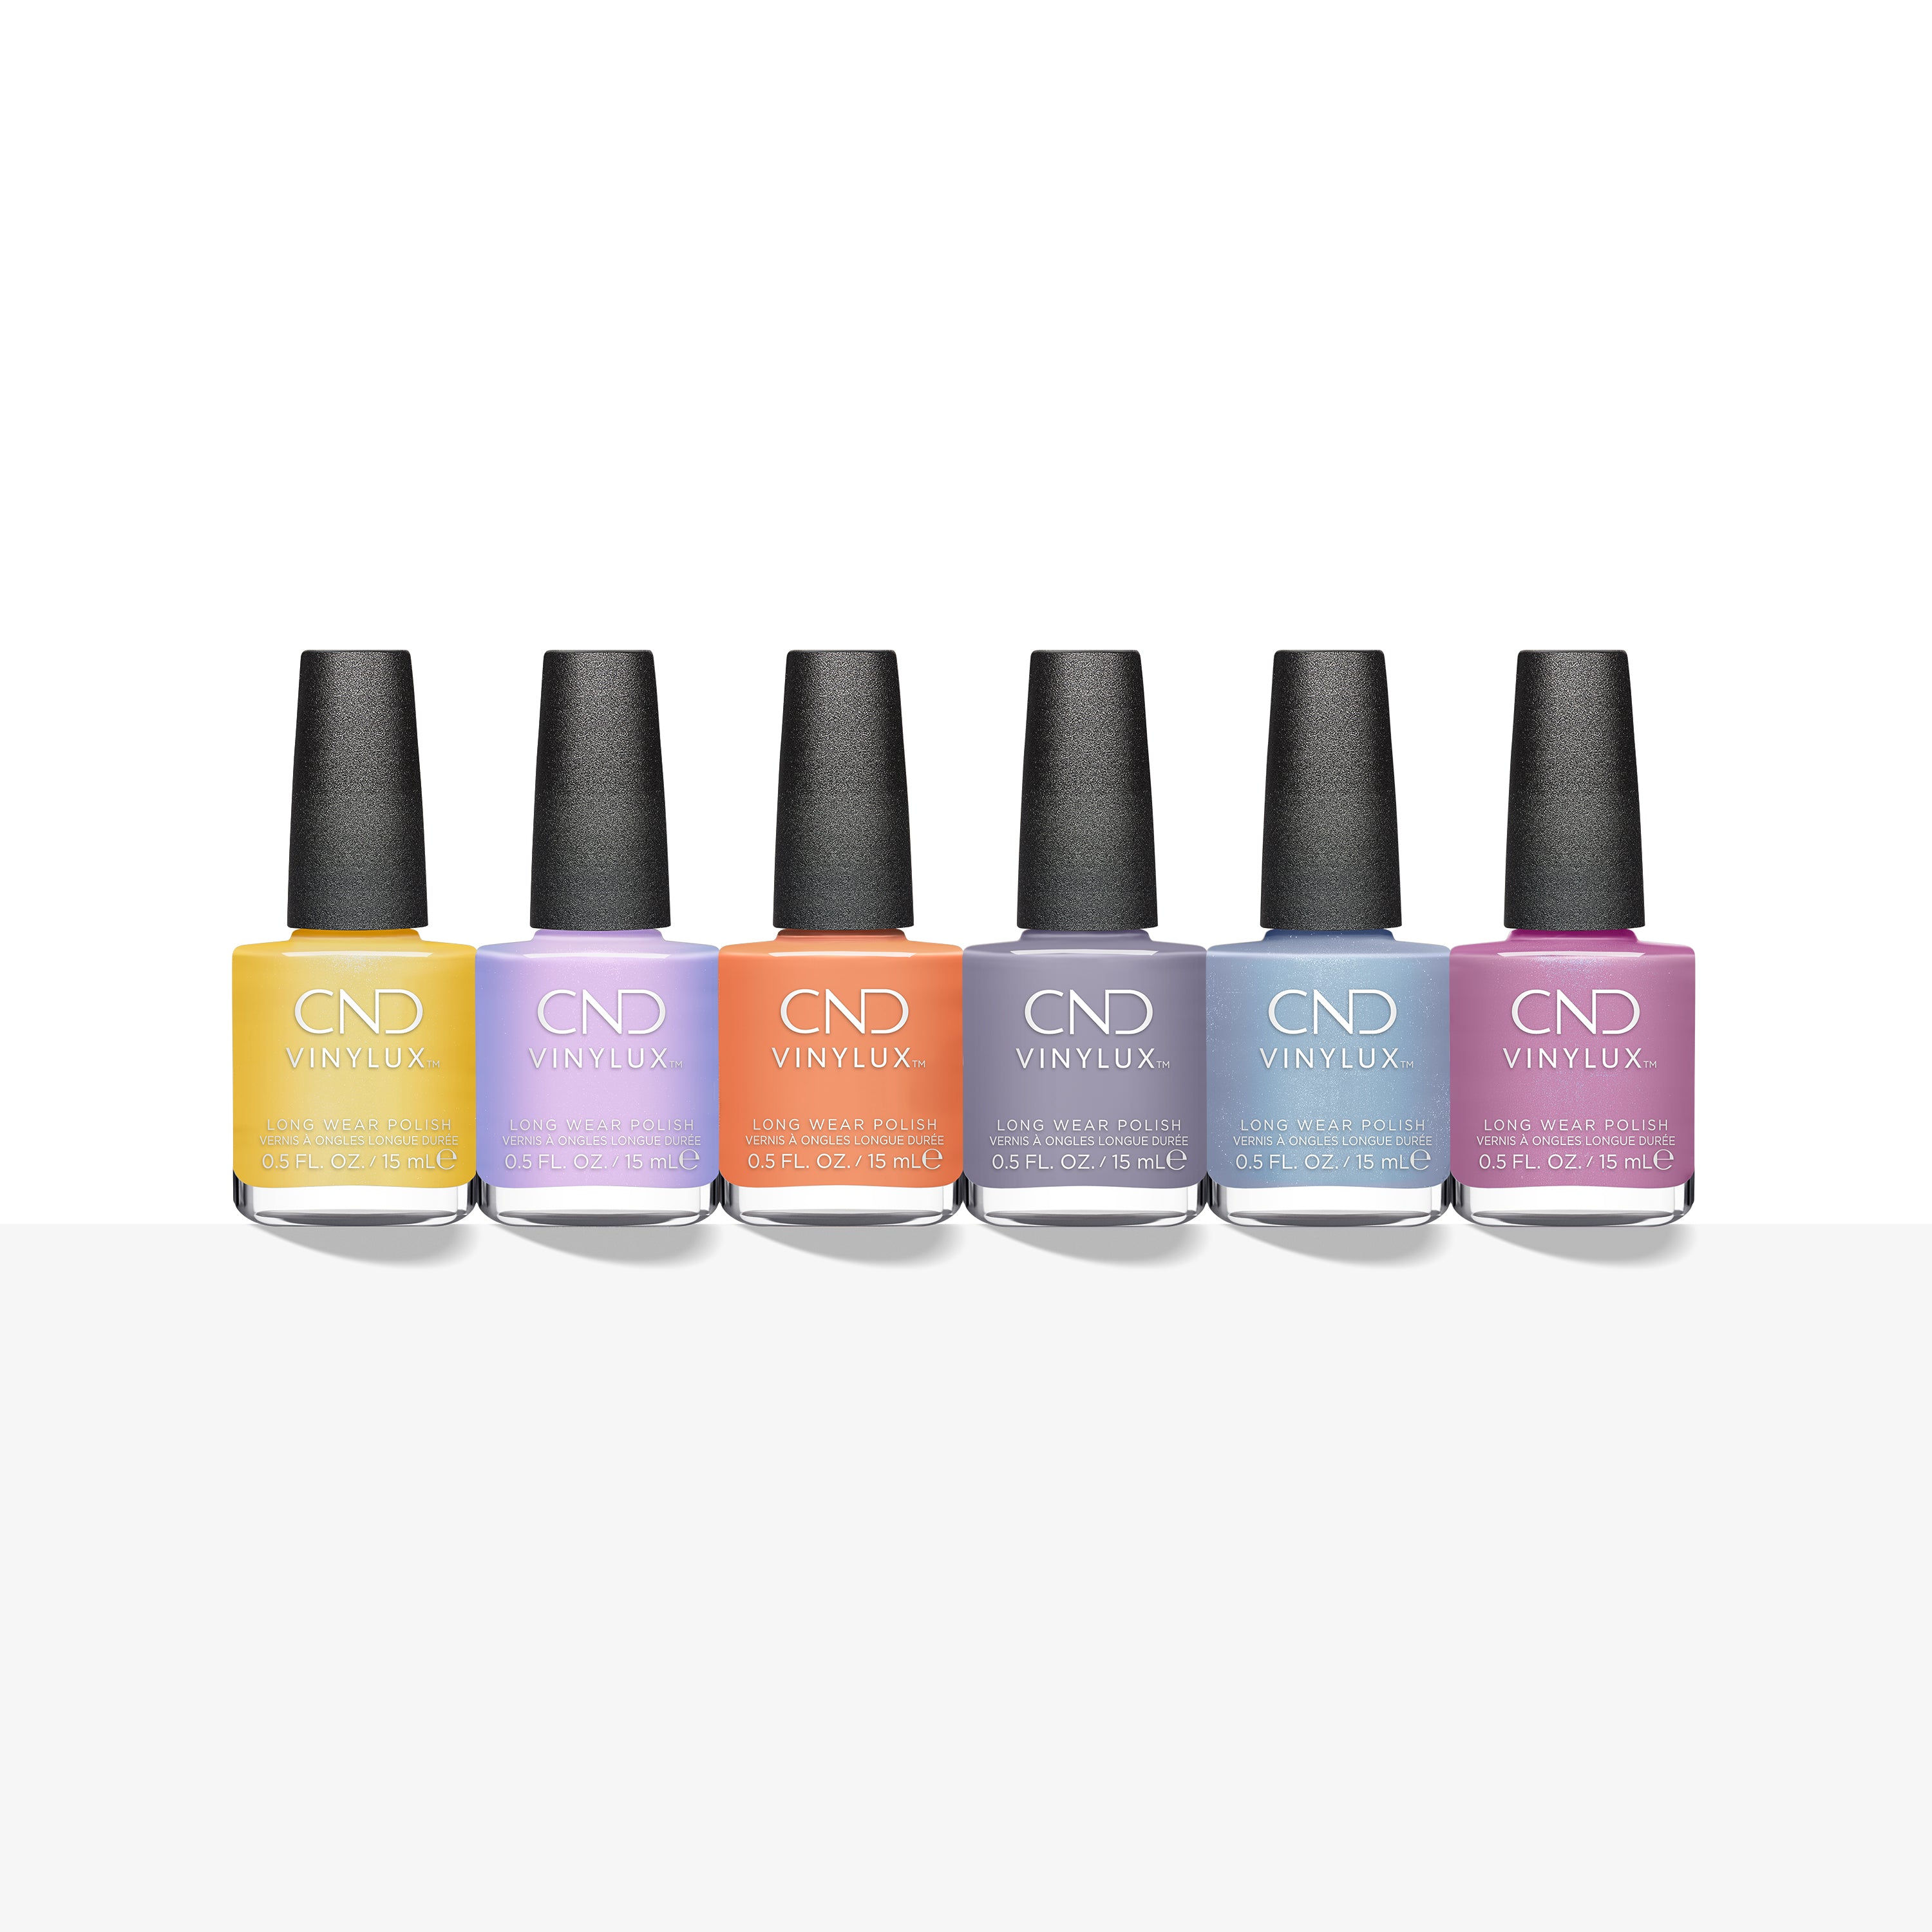 CND™ Vinylux™ Chic-a-delic 15ml